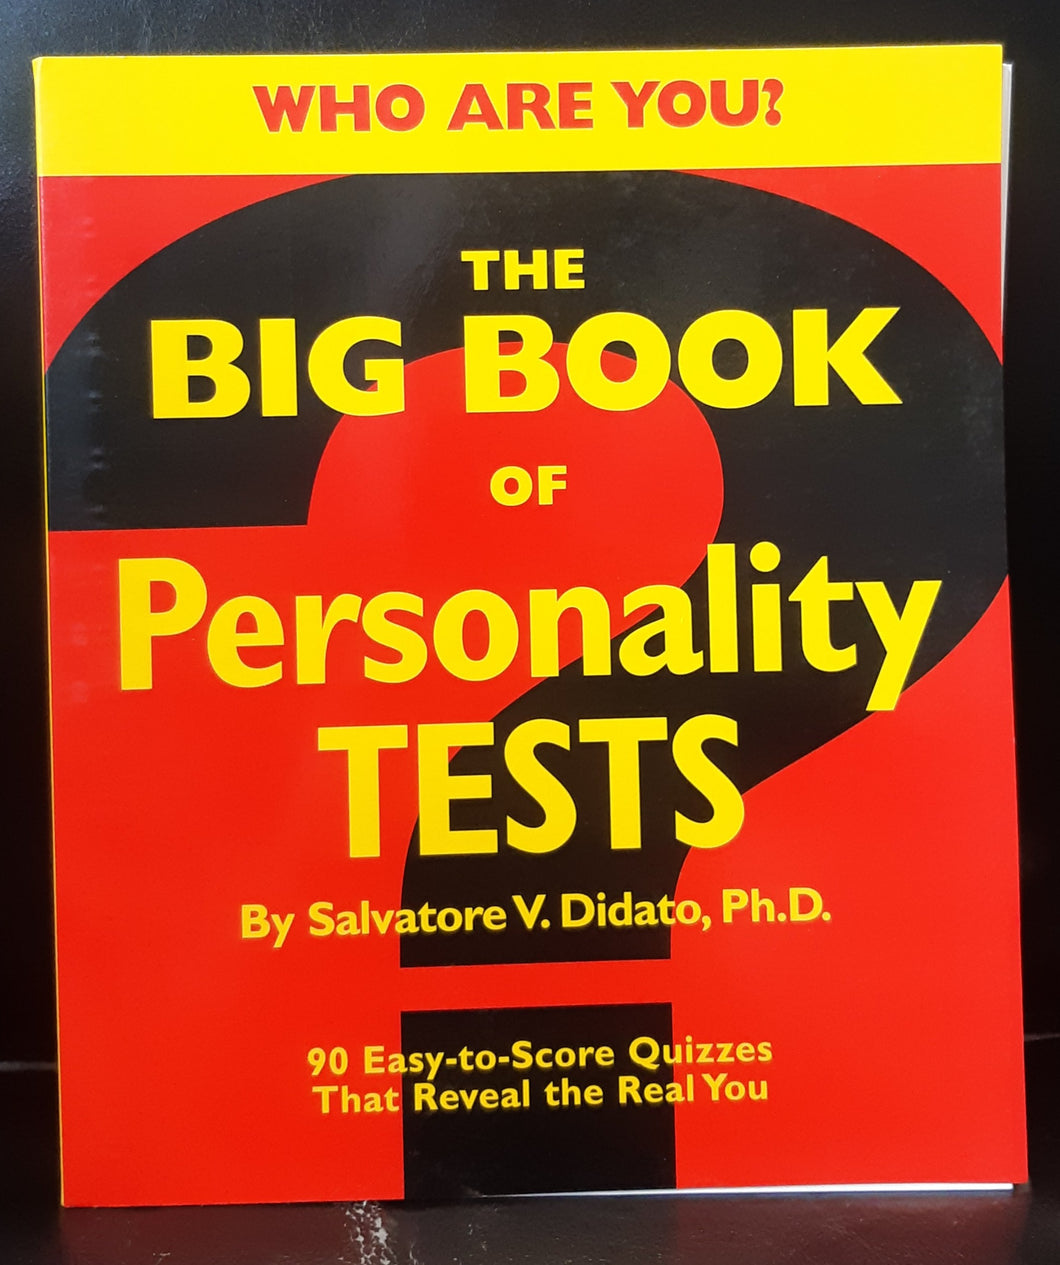 The Big Book of Personality Tests: 90 Easy-to-Score Quizzes That Reveal the Real You by Salvatore V. Didato, Ph.D